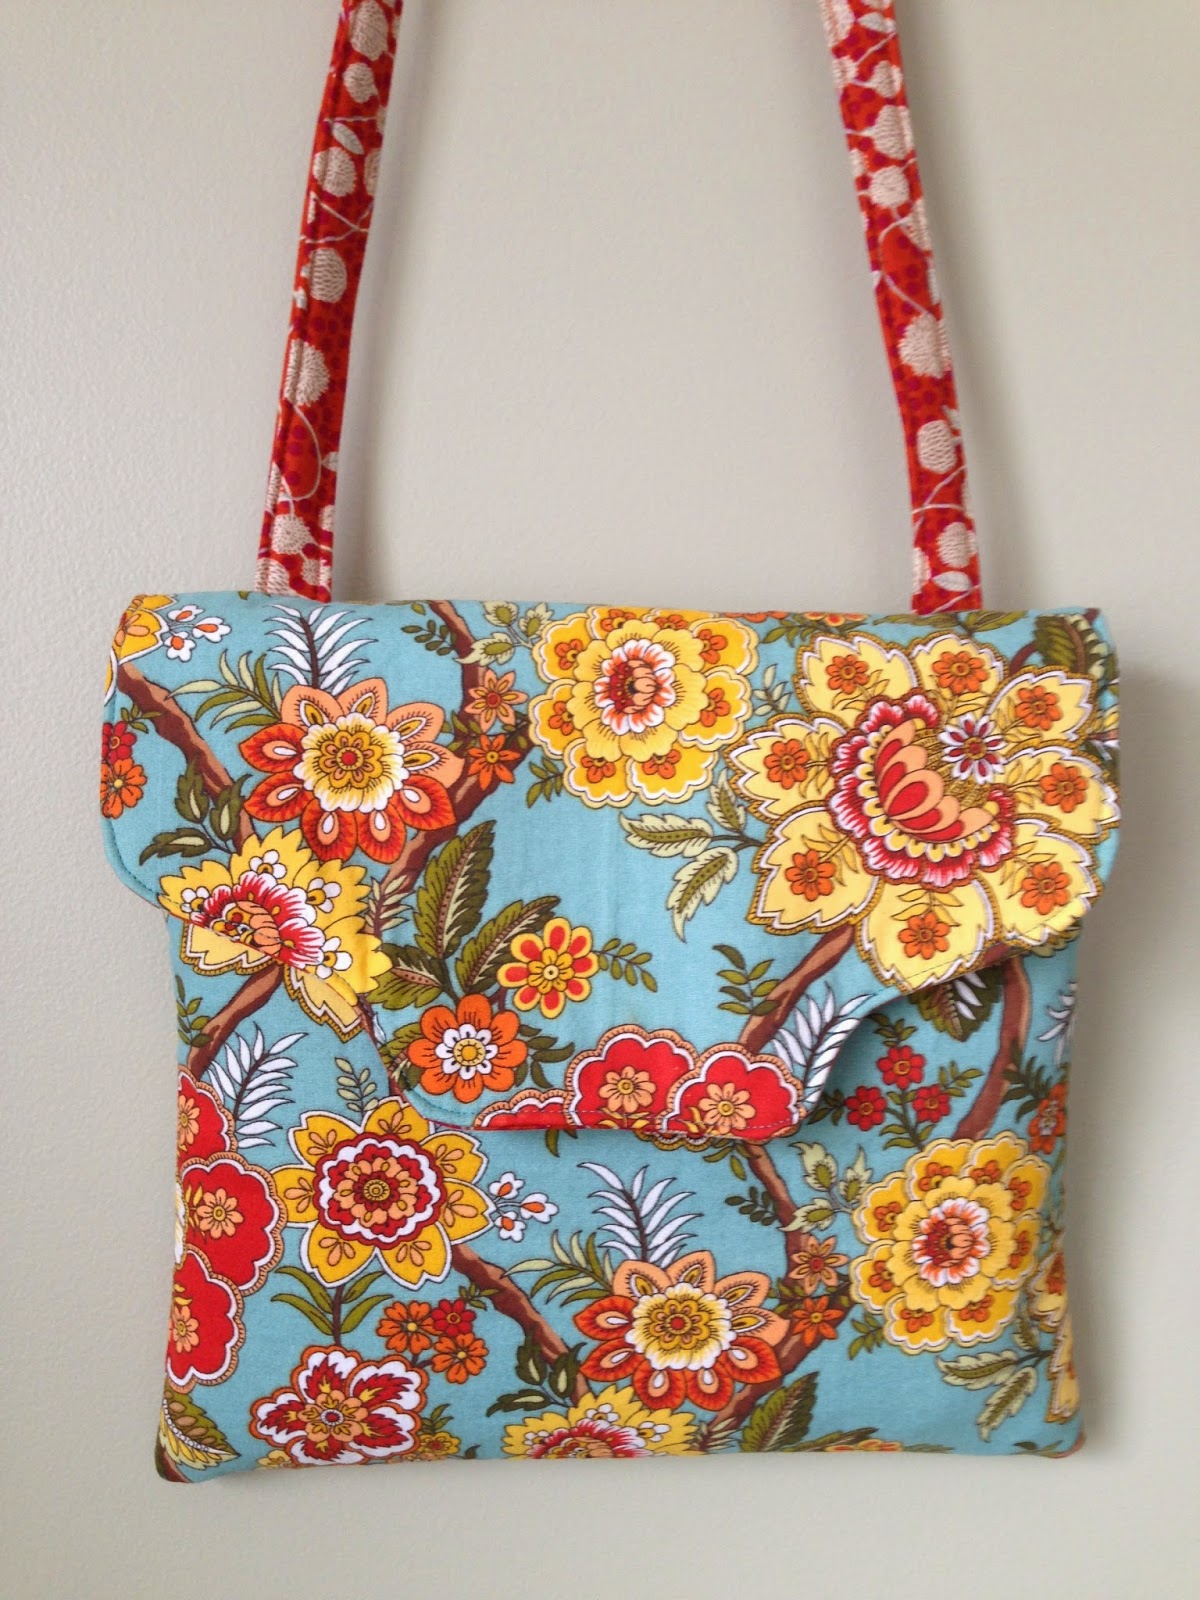 Crossbody Purse Patterns For Sewing | City of Kenmore, Washington